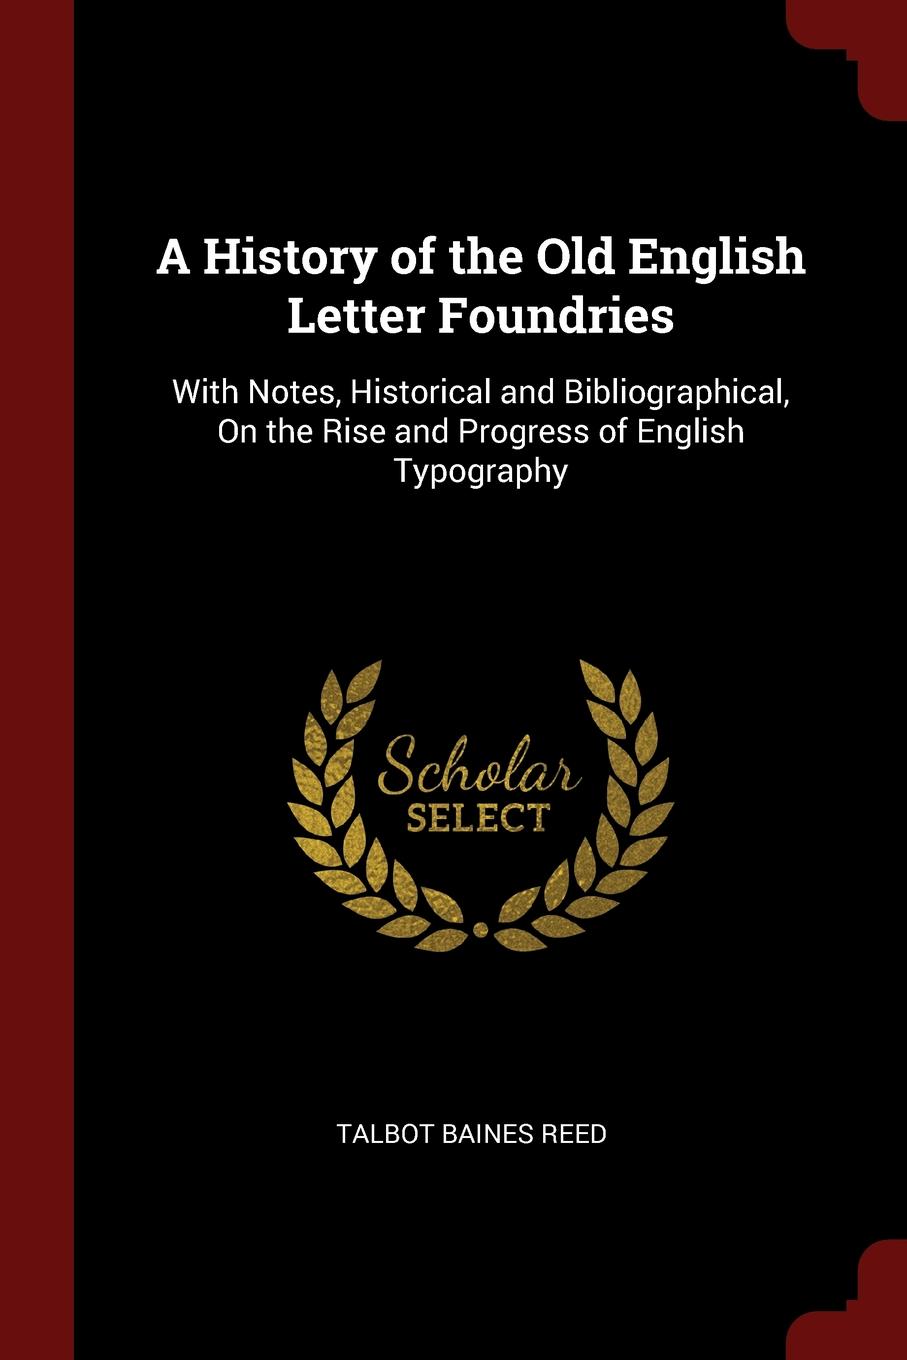 A History of the Old English Letter Foundries. With Notes, Historical and Bibliographical, On the Rise and Progress of English Typography